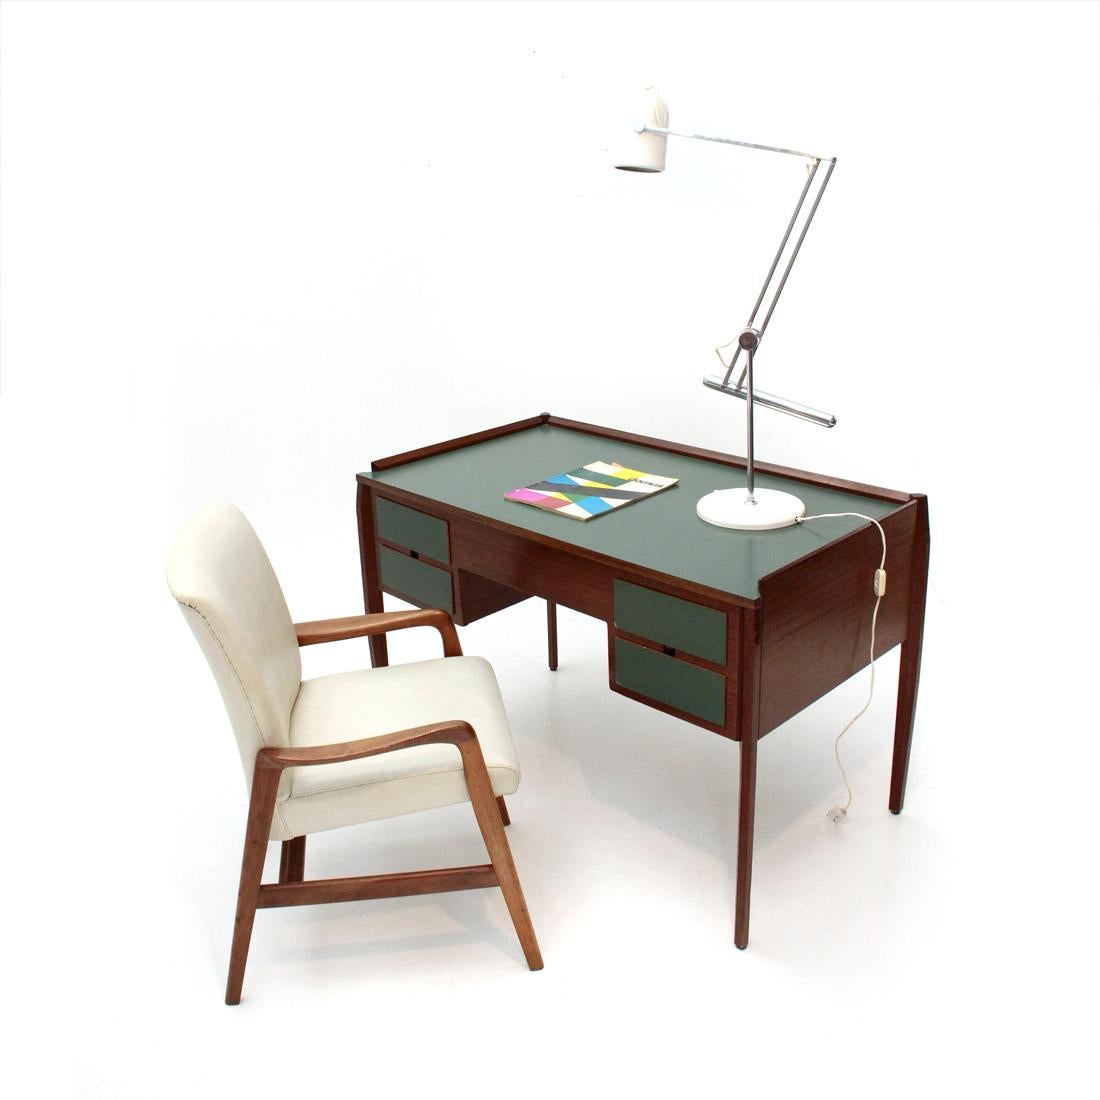 Italian Mid-Century Modern Desk with Formica Top, 1960s 5